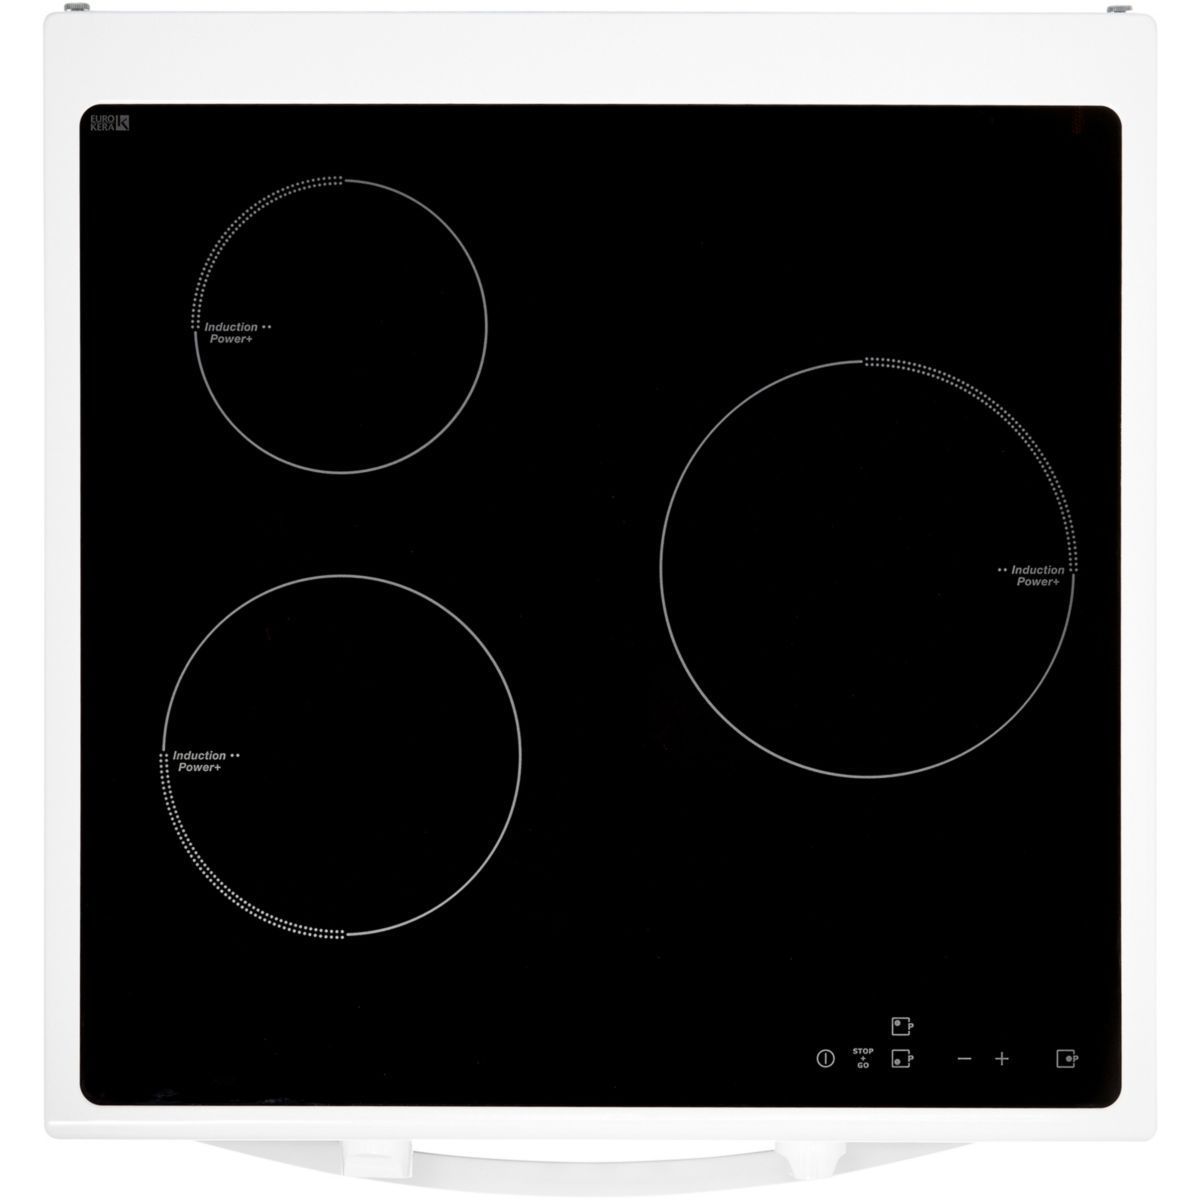 Cuisiniere Induction Faure Fci6530cwa